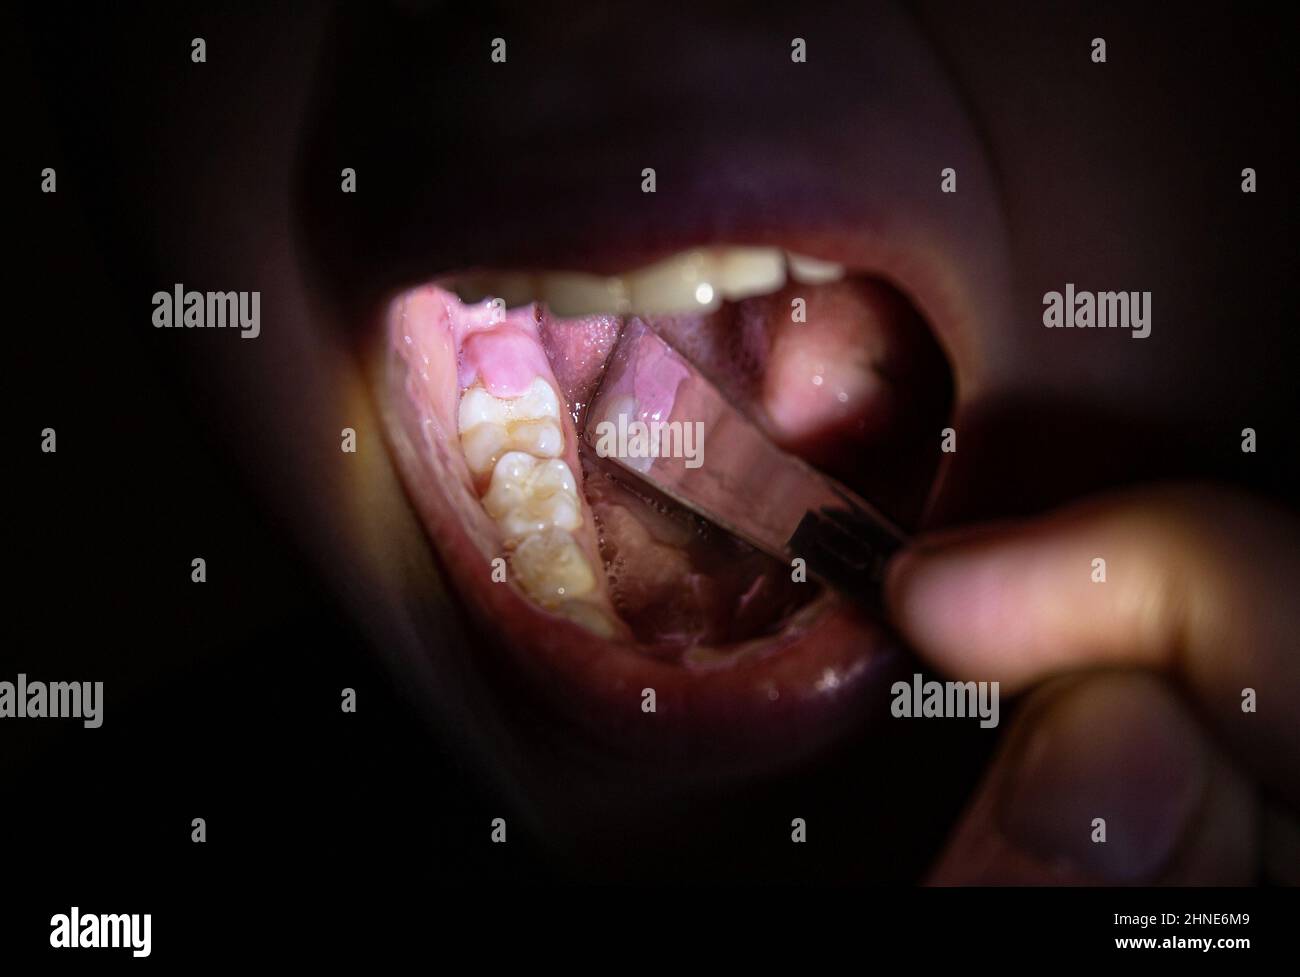 6 year old child with gum flap over child molar. Medical problem, Pericoronitis. 6 year old girl molar eruption. Stock Photo